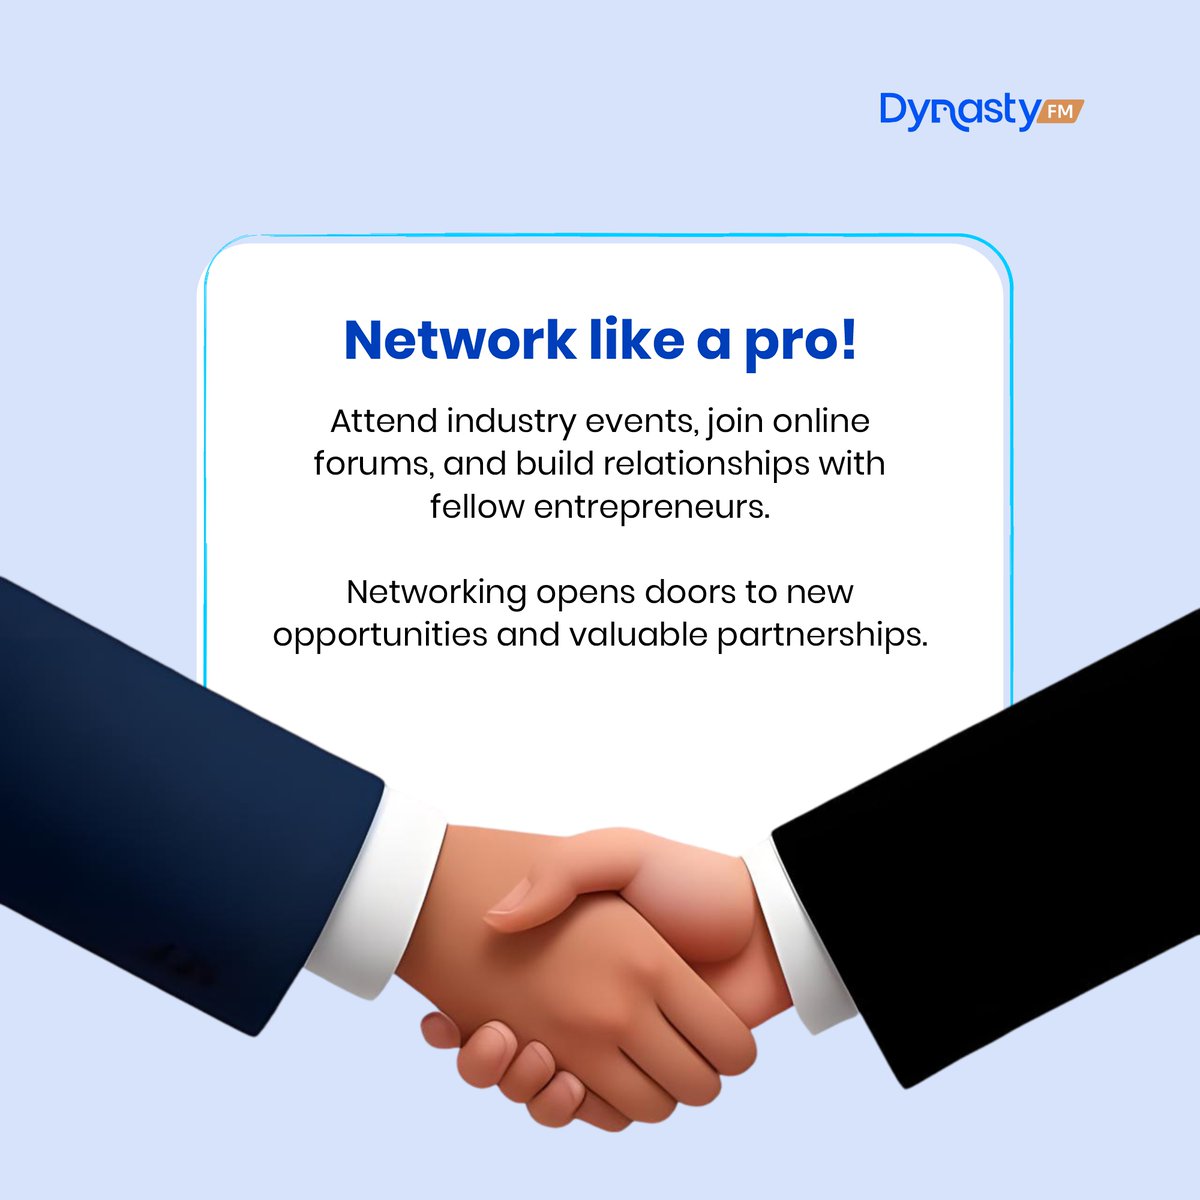 Network like a pro to expand your horizons and grow your business. #BusinessNetworking #SuccessTips #DynastyRadio